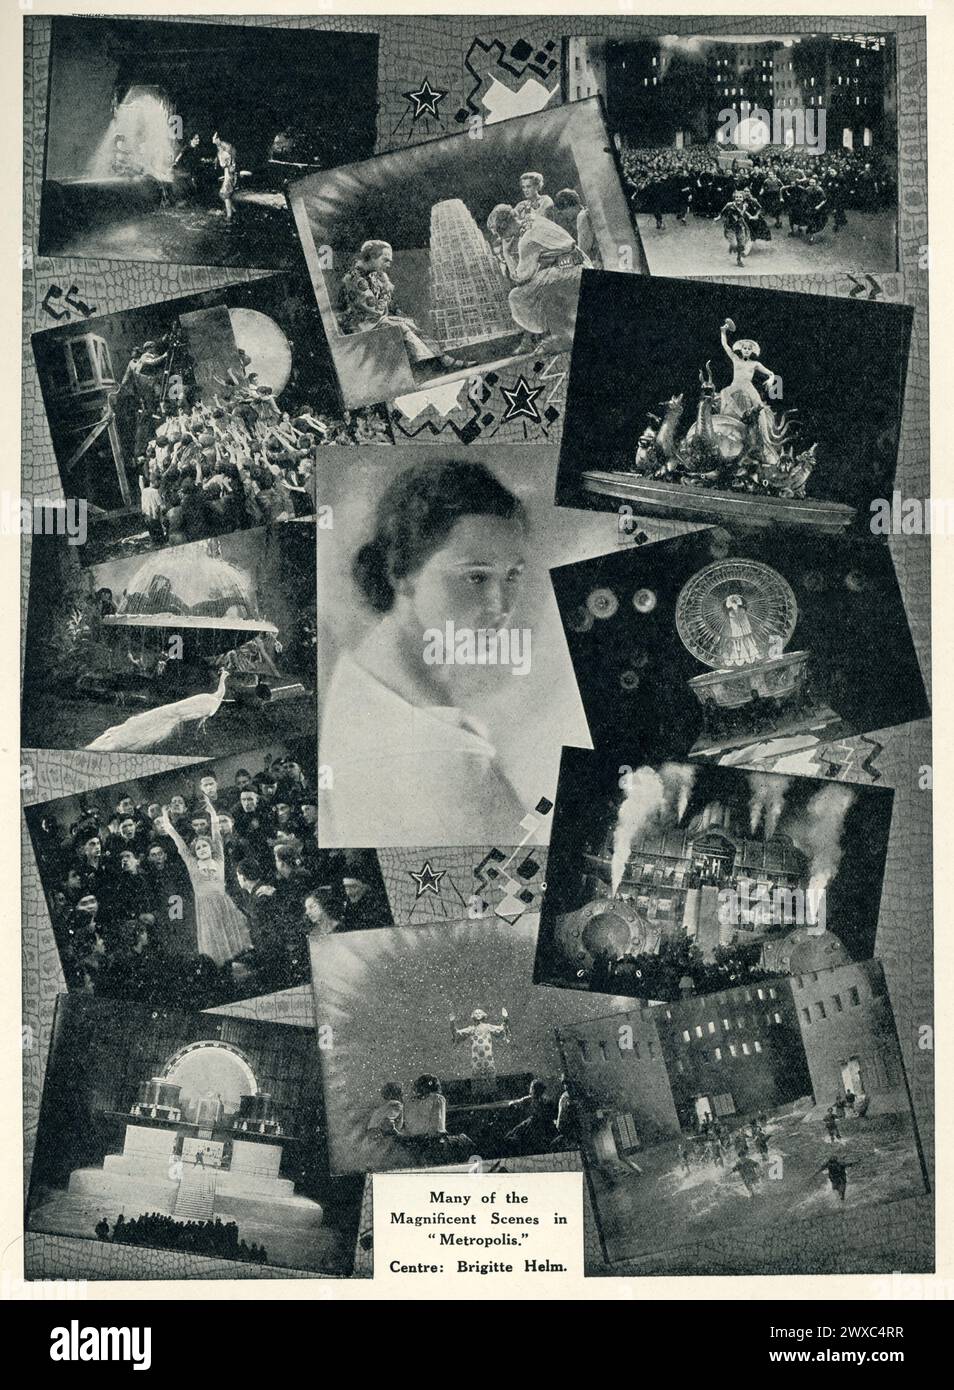 Scenes including BRIGITTE HELM and on set candids during filming from page from original release British programme for METROPOLIS 1927 director FRITZ LANG novel and screenplay Thea von Harbou Universum Film (UFA) Stock Photo